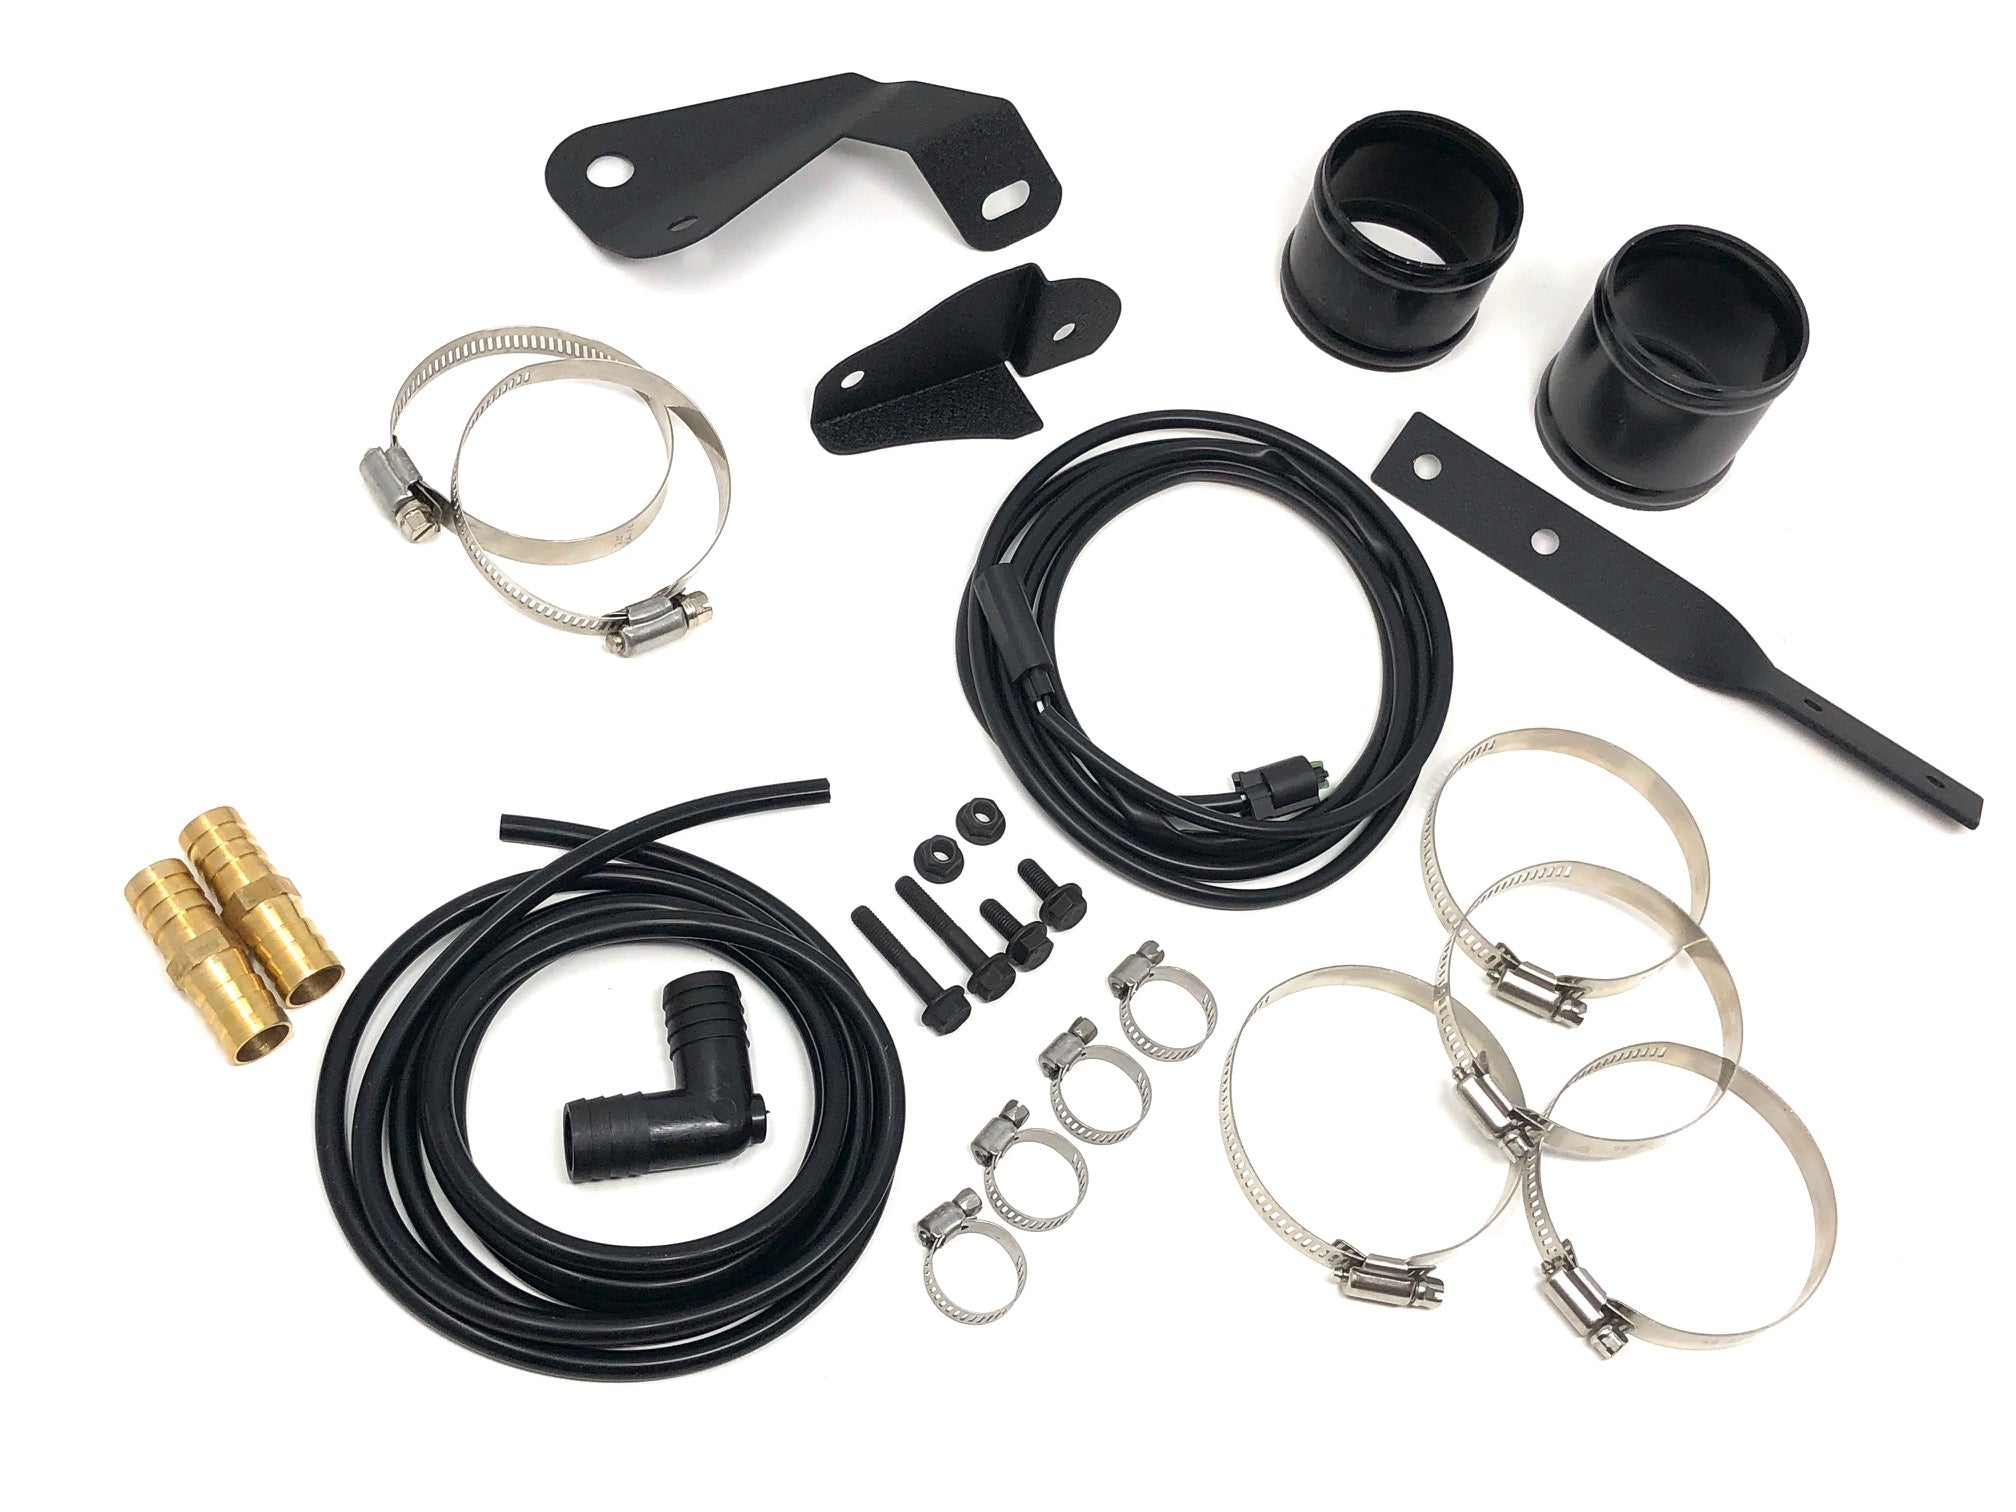 E9x/E8x Relocated Inlet Kit - 0